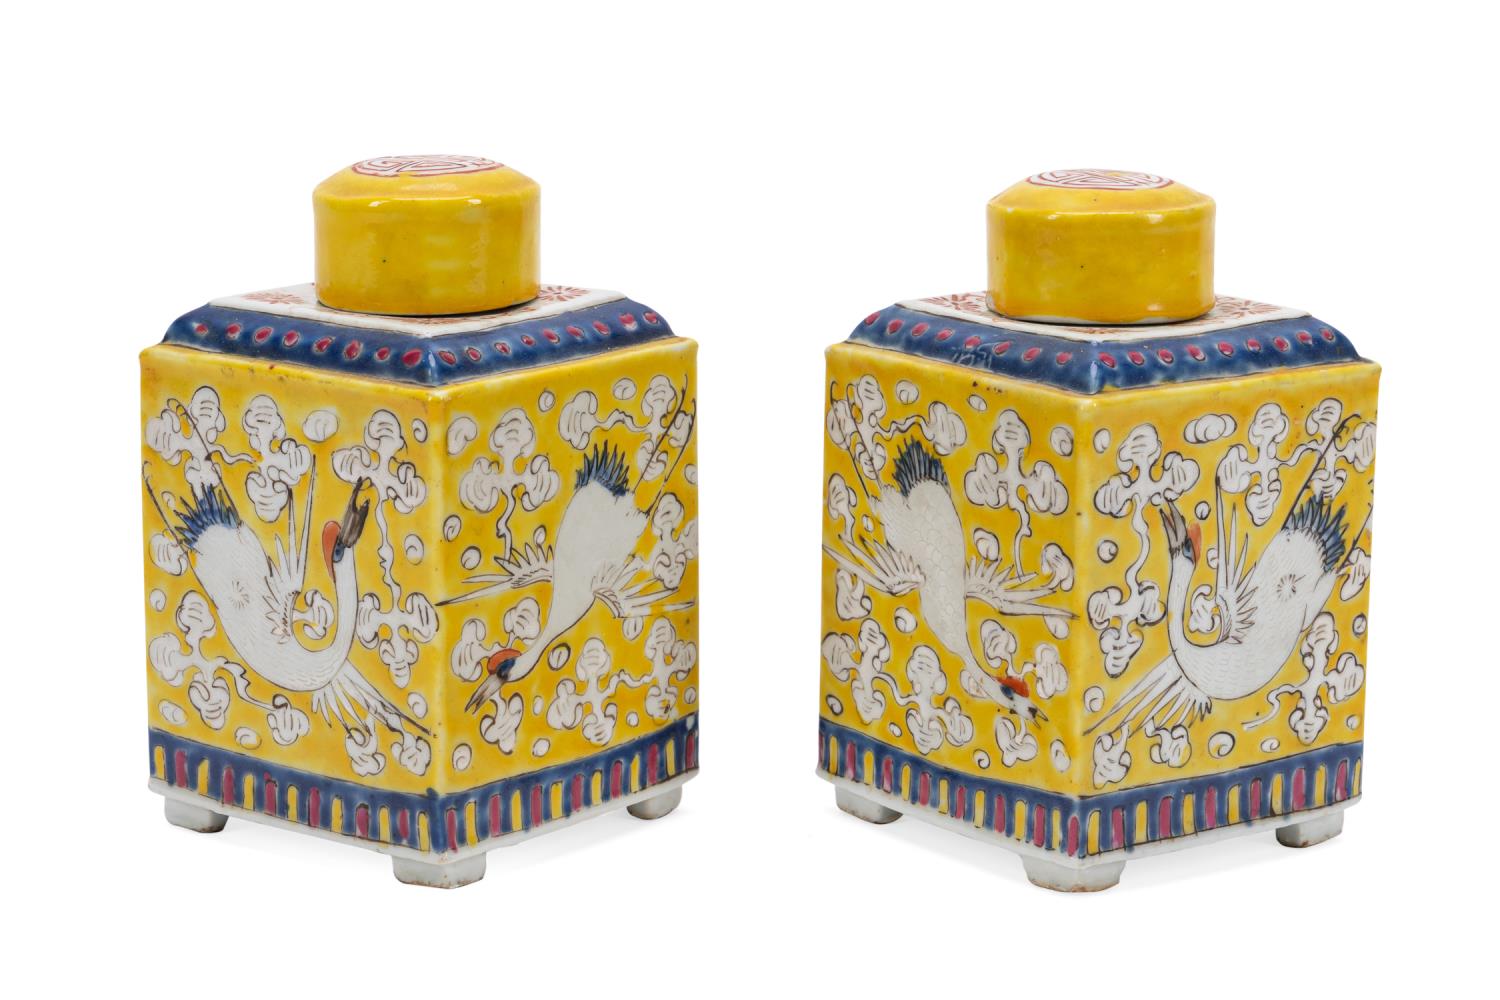 PAIR OF CHINESE YELLOW TEA CADDIES 29f77a